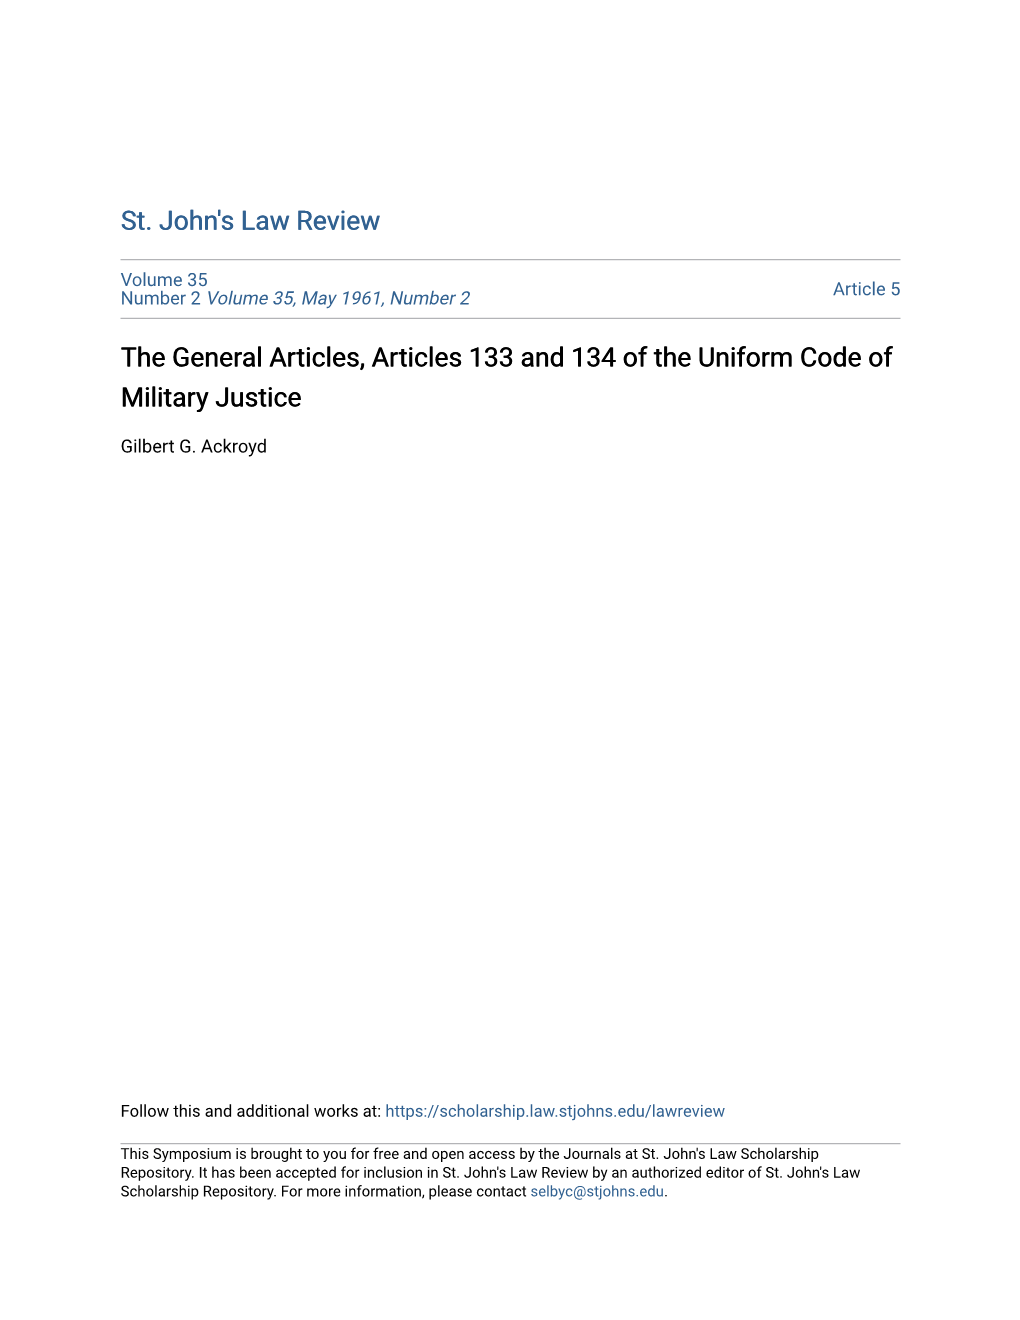 The General Articles, Articles 133 and 134 of the Uniform Code of Military Justice